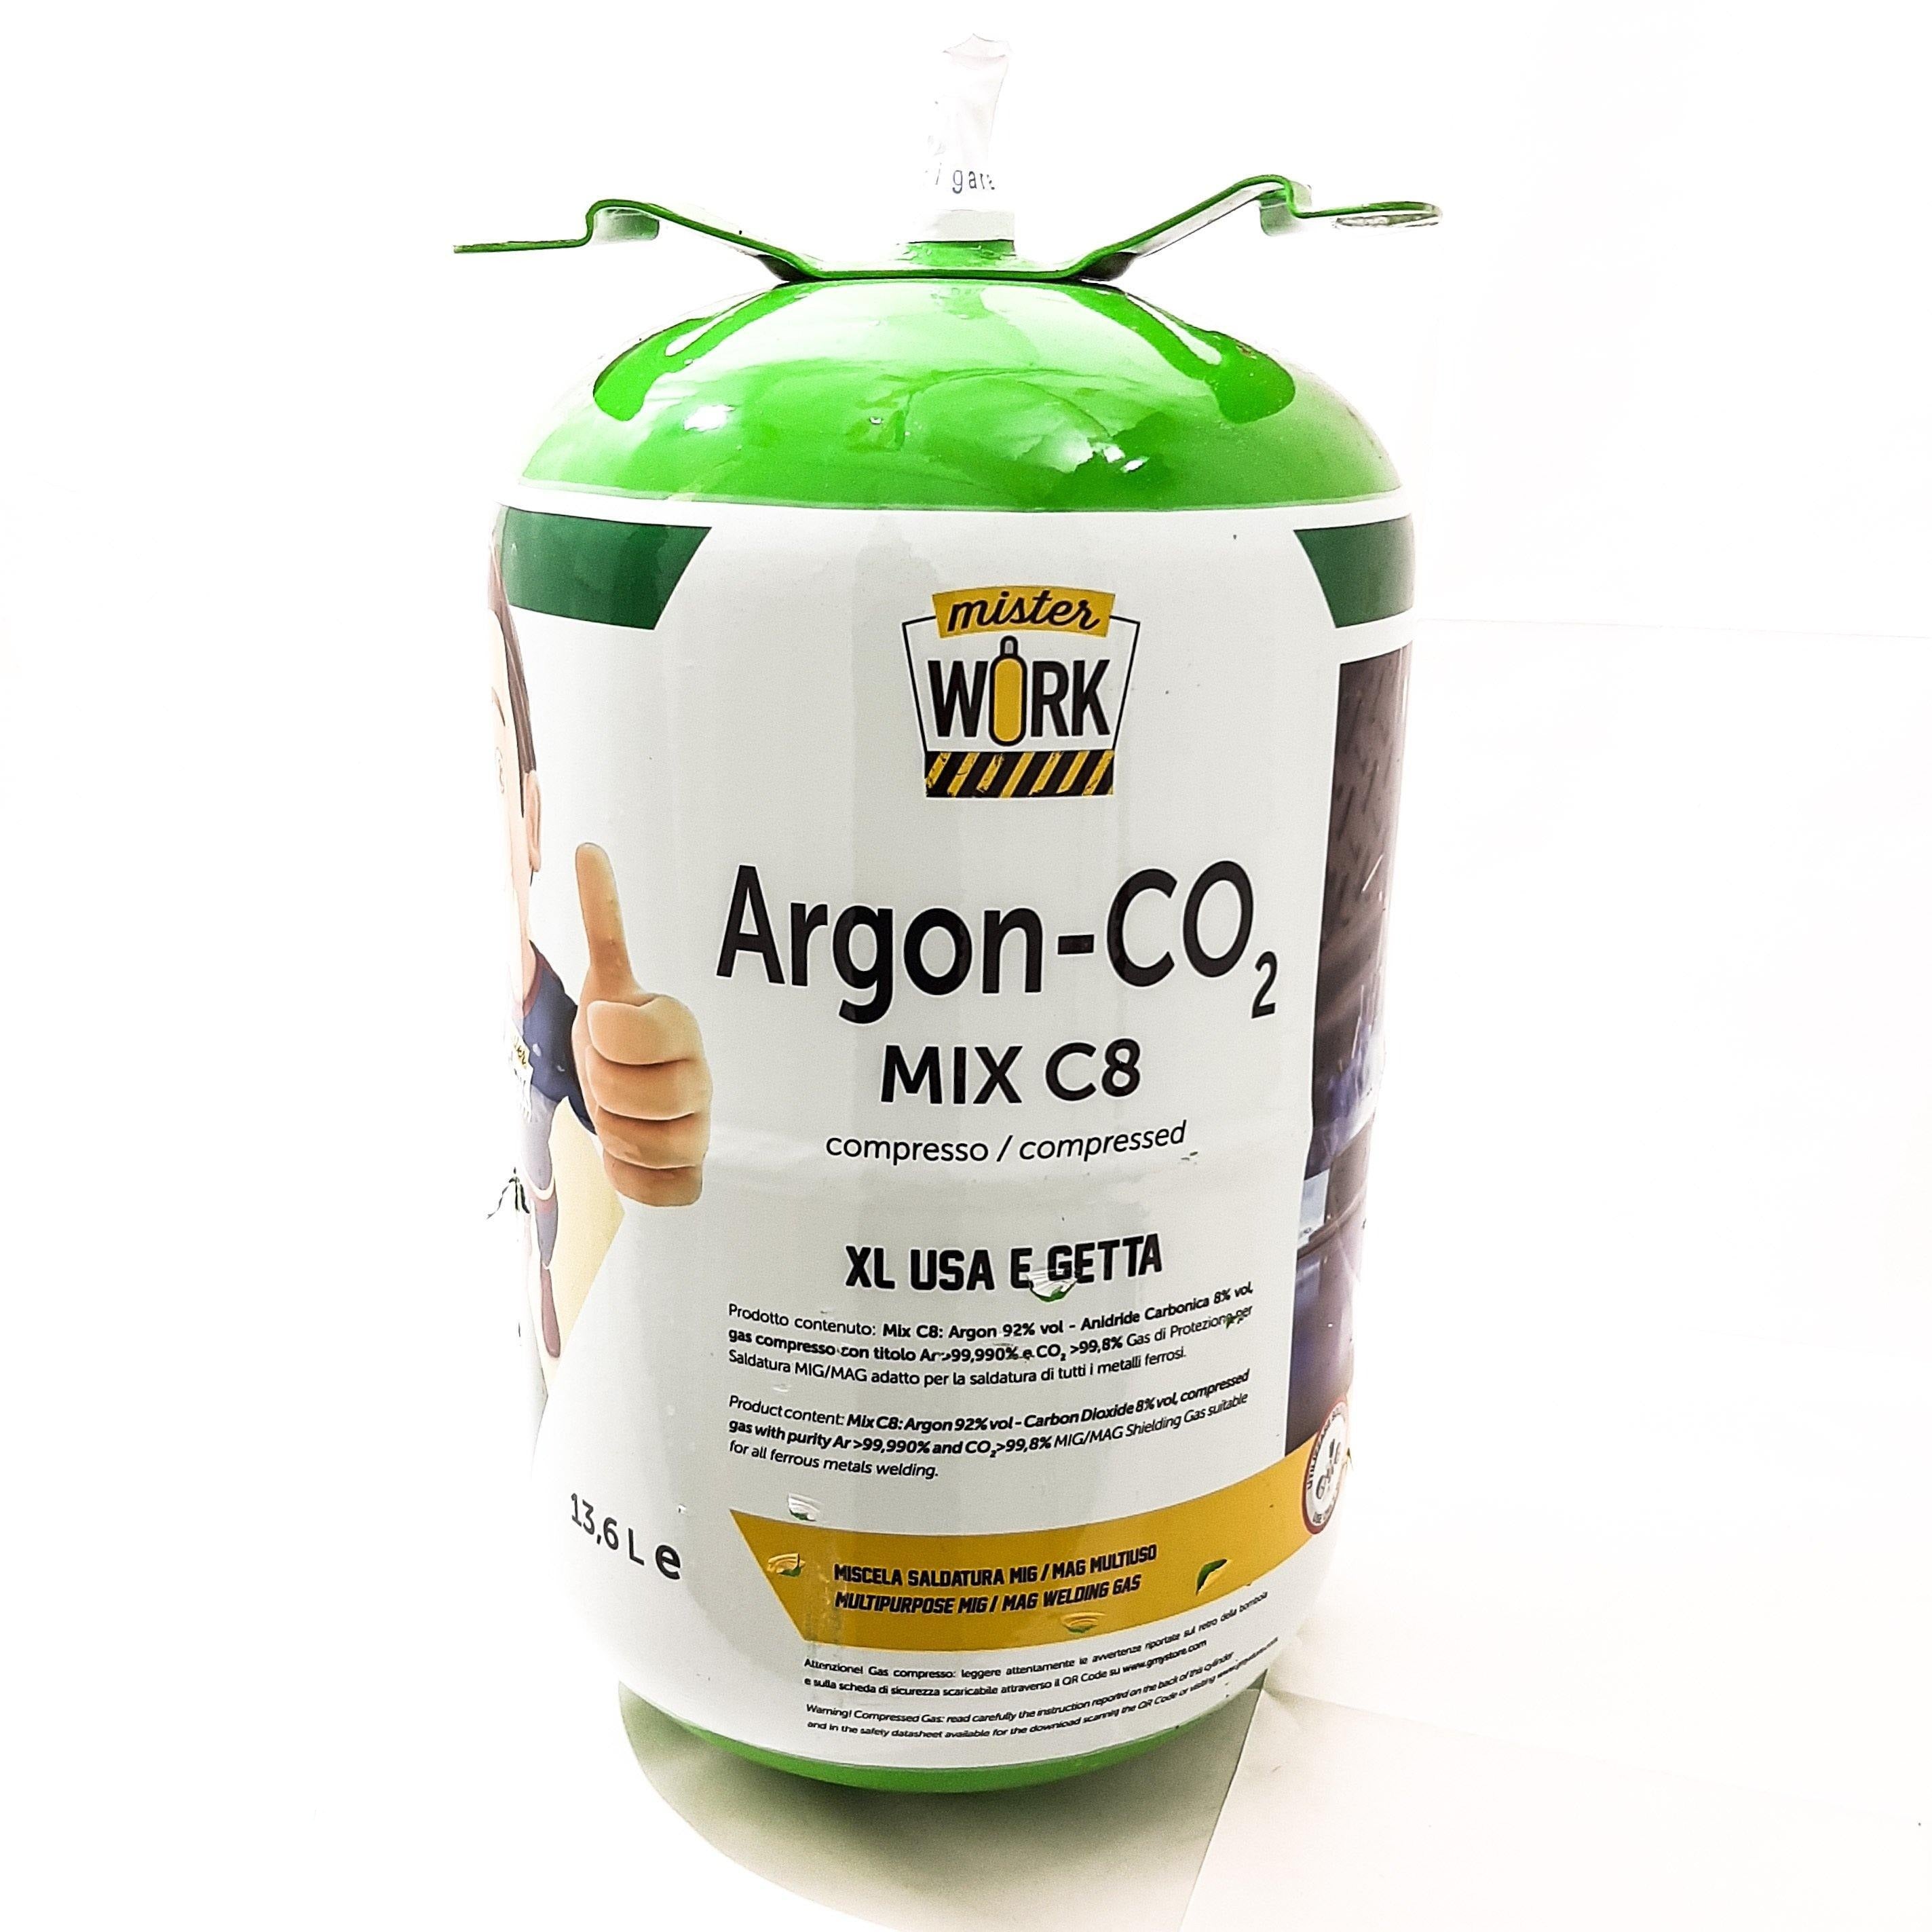 Small Ten Litre Size Argon CO2 Mix Gas Bottle With Regulator For